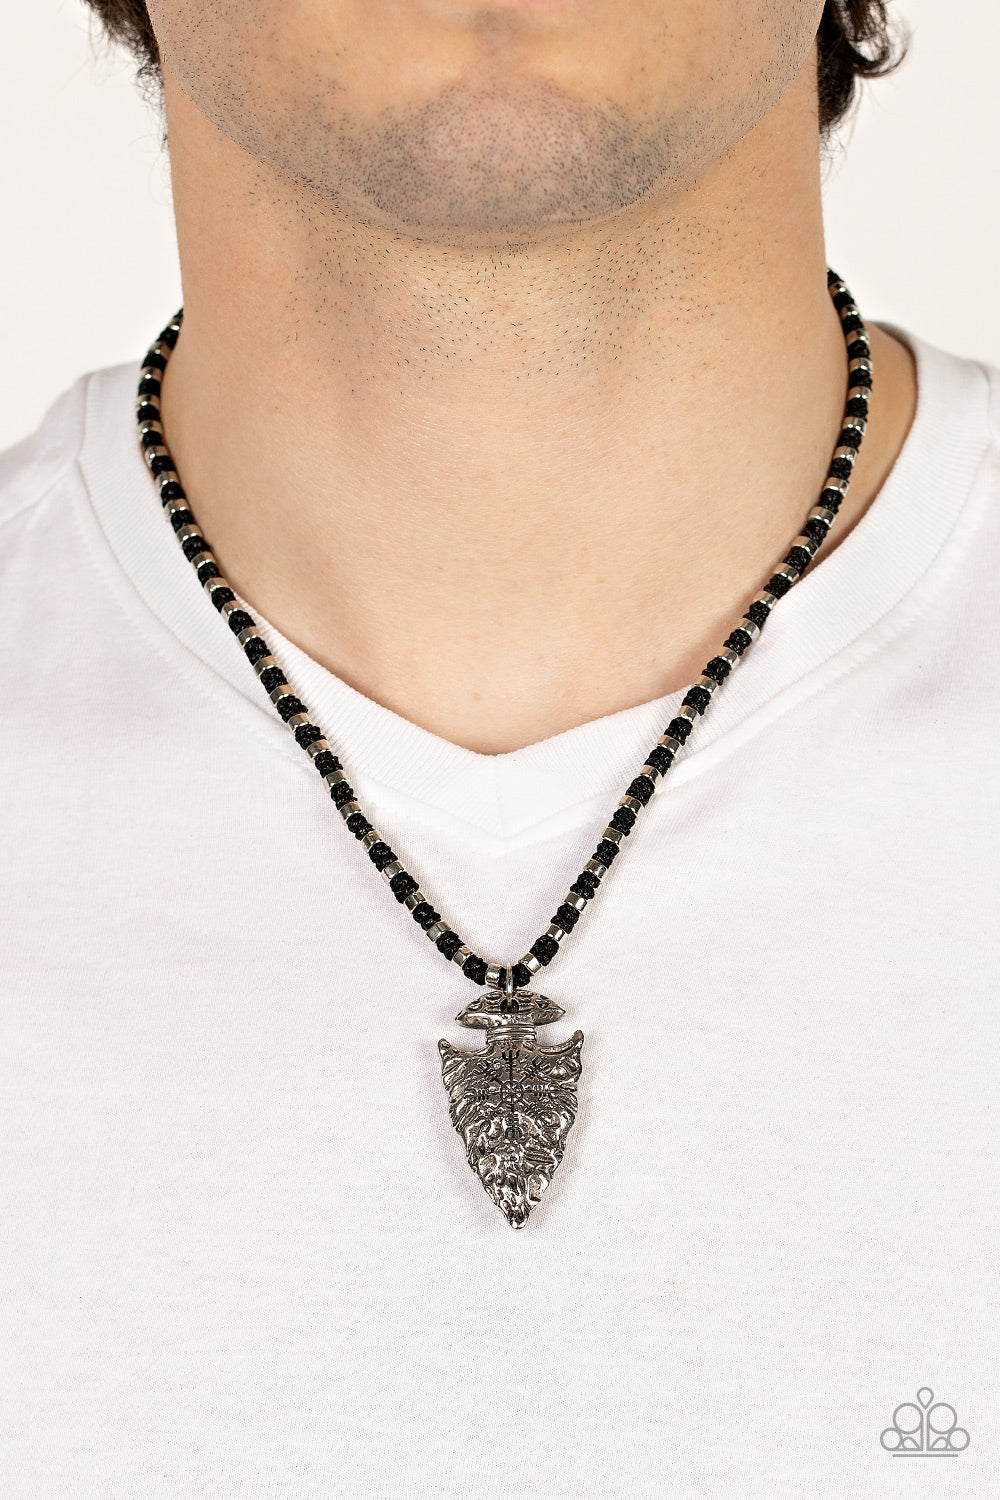 Paparazzi “Get Your ARROWHEAD in the Game” Black Necklace